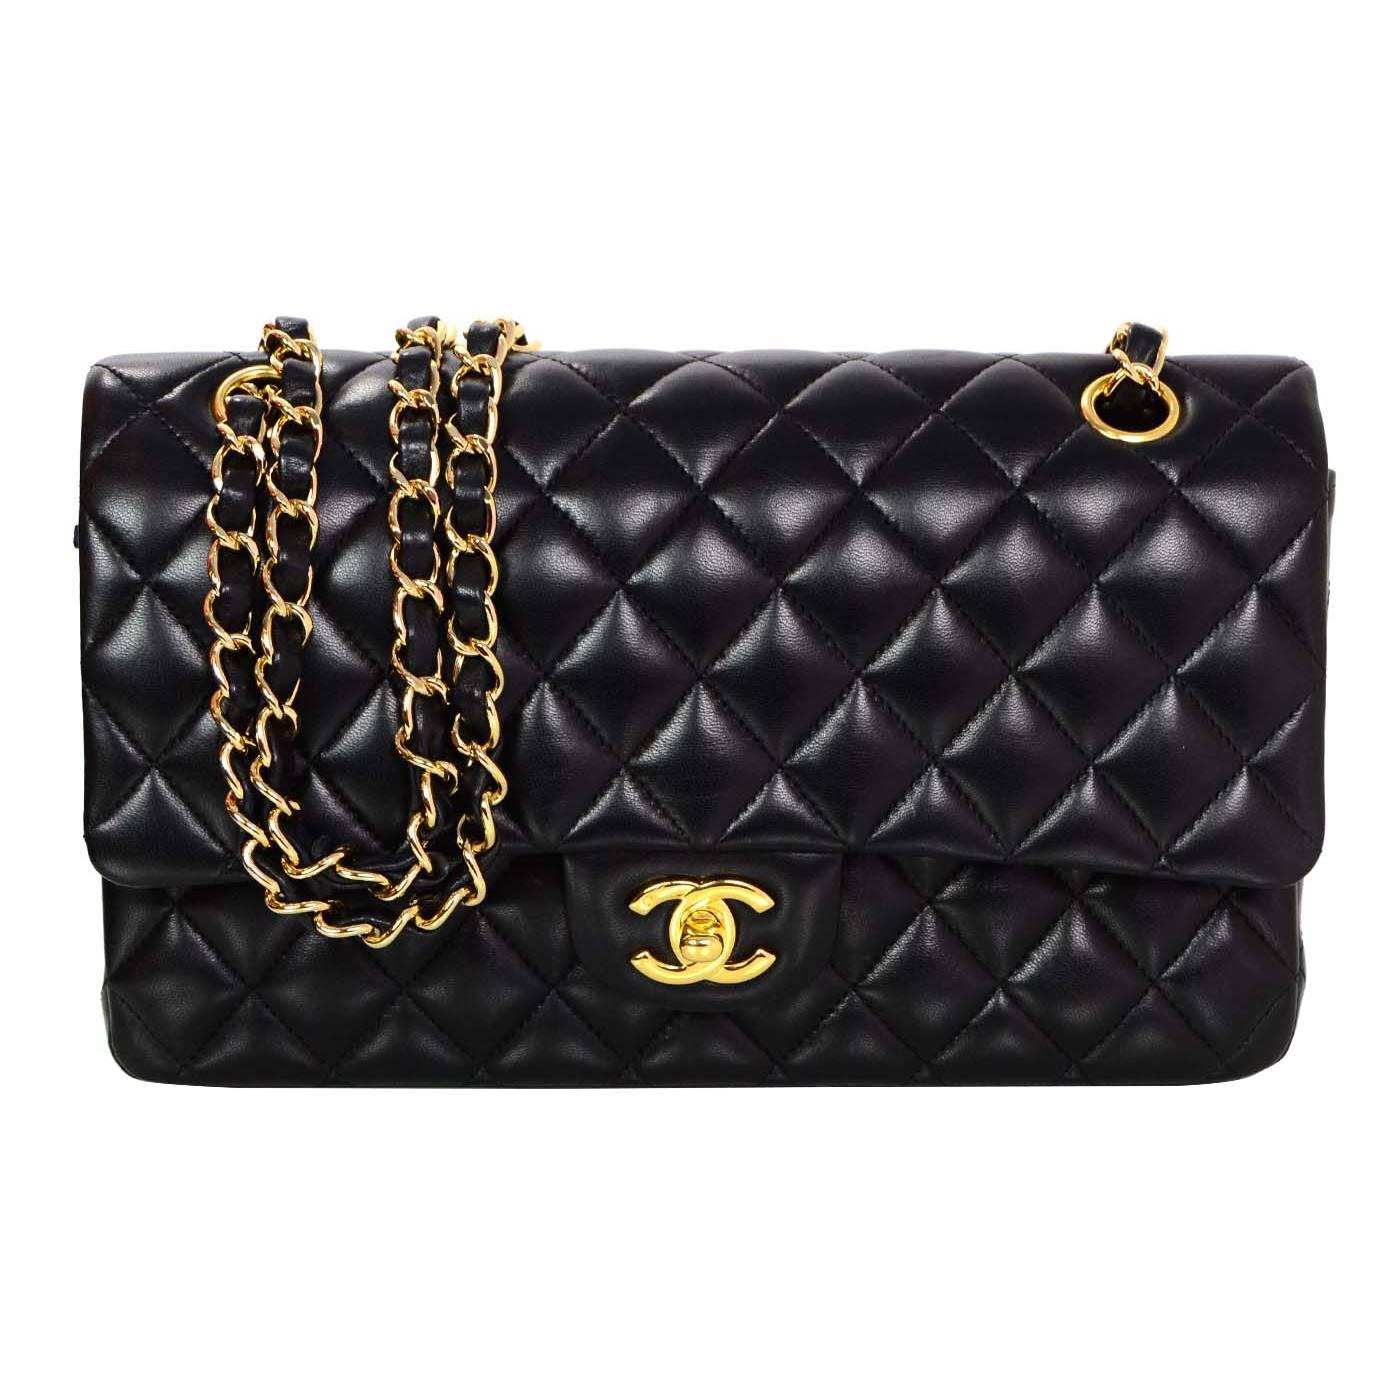 Chanel Black Quilted Lambskin Leather Double Flap Medium Classic Bag